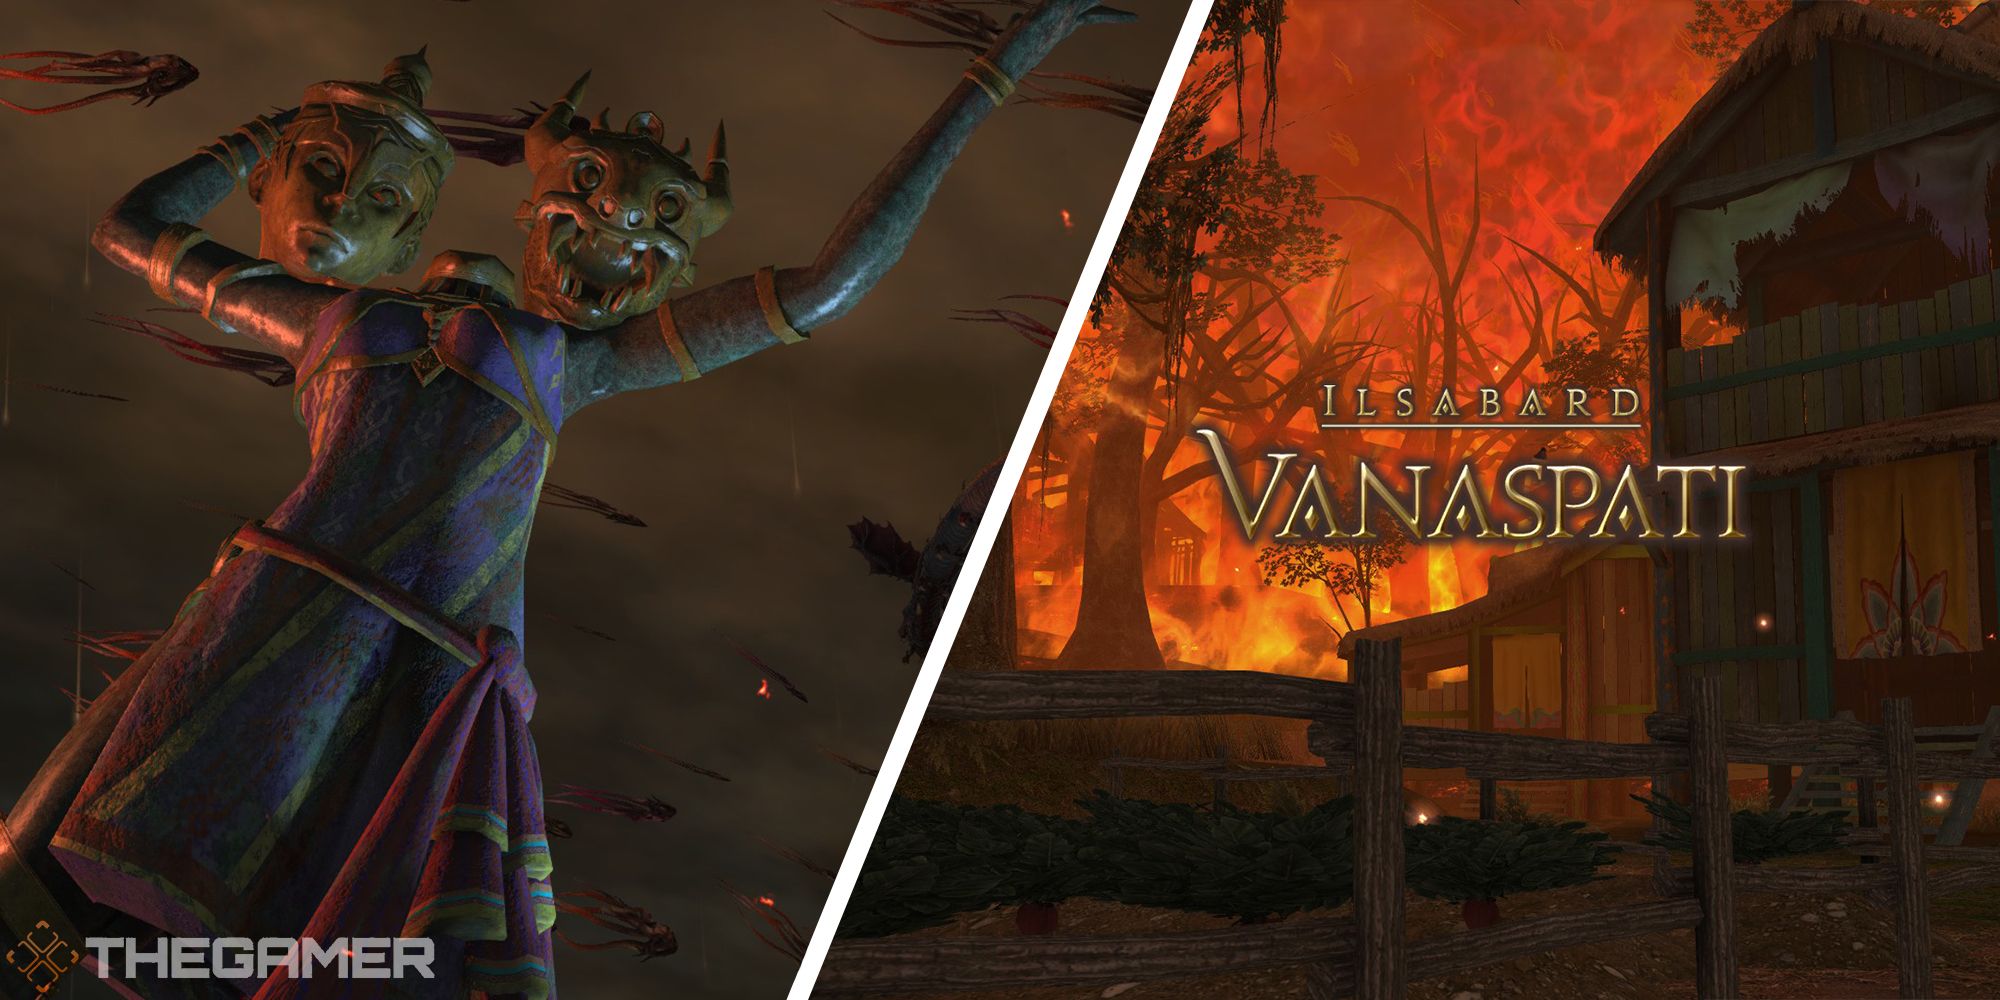 vanaspati split split image with statue and forest on fire